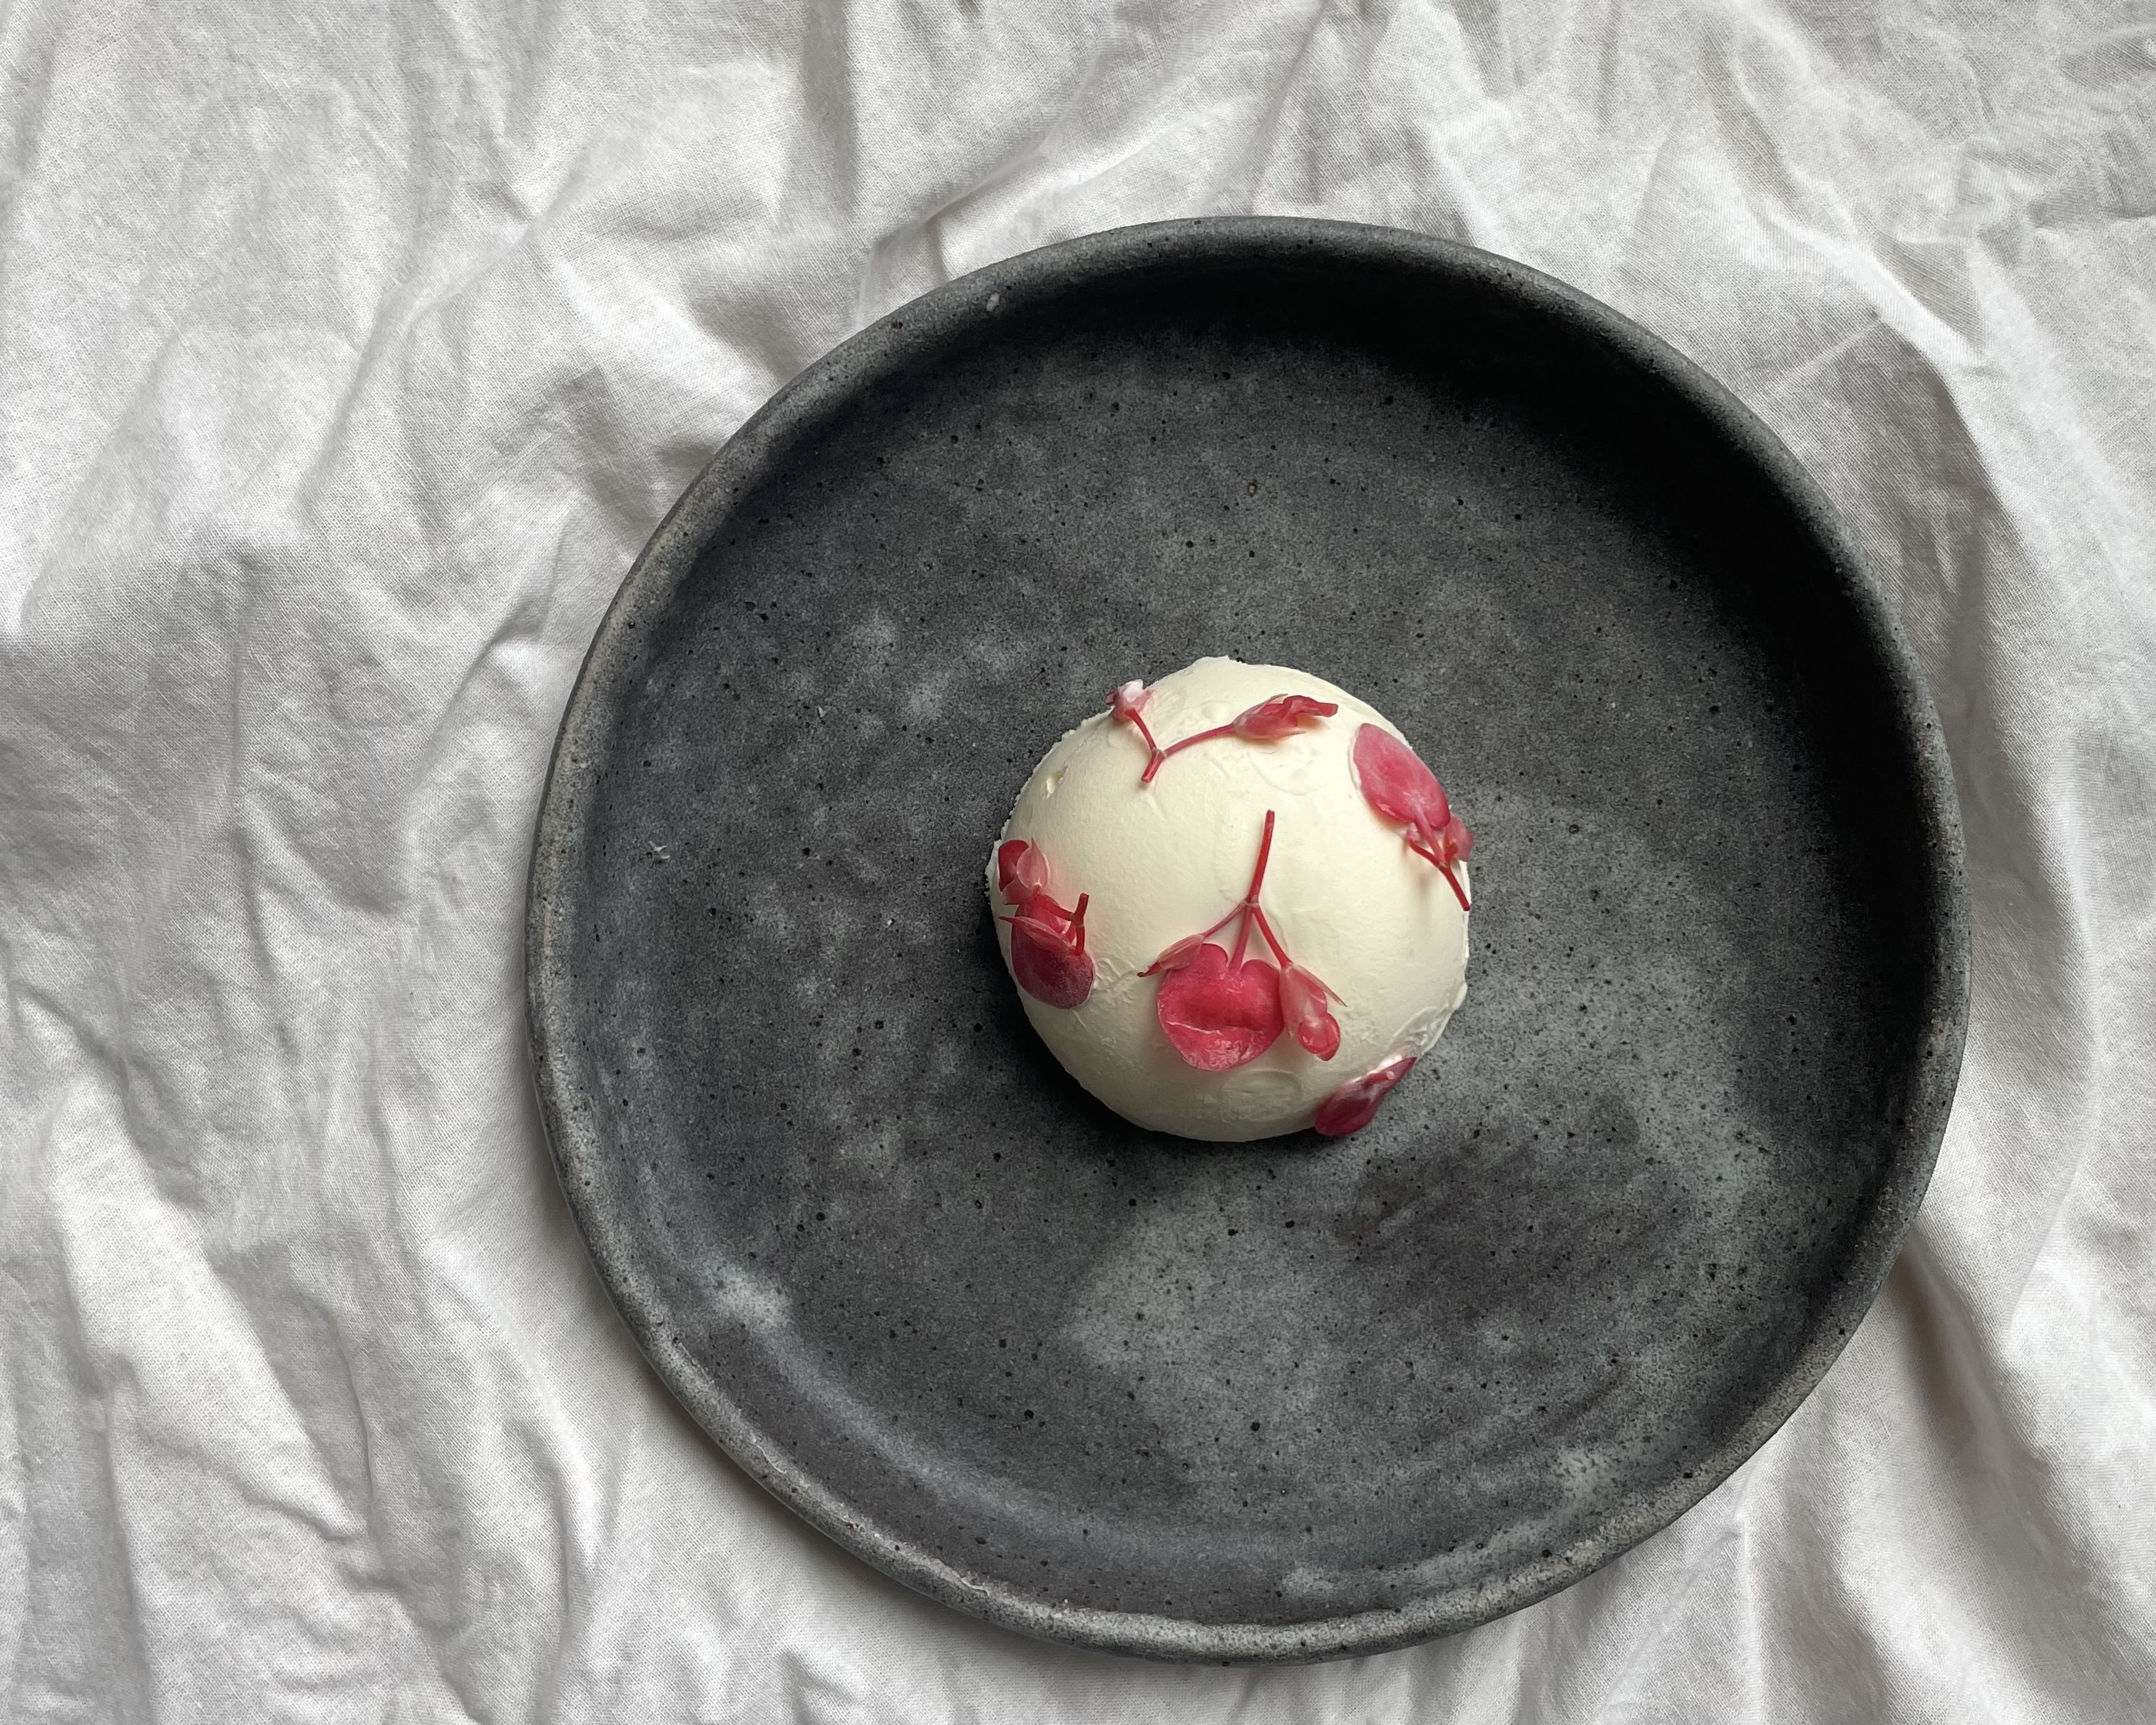 A gray ceramic plate features a white dome of ice cream with carefully-placed pink flowers.